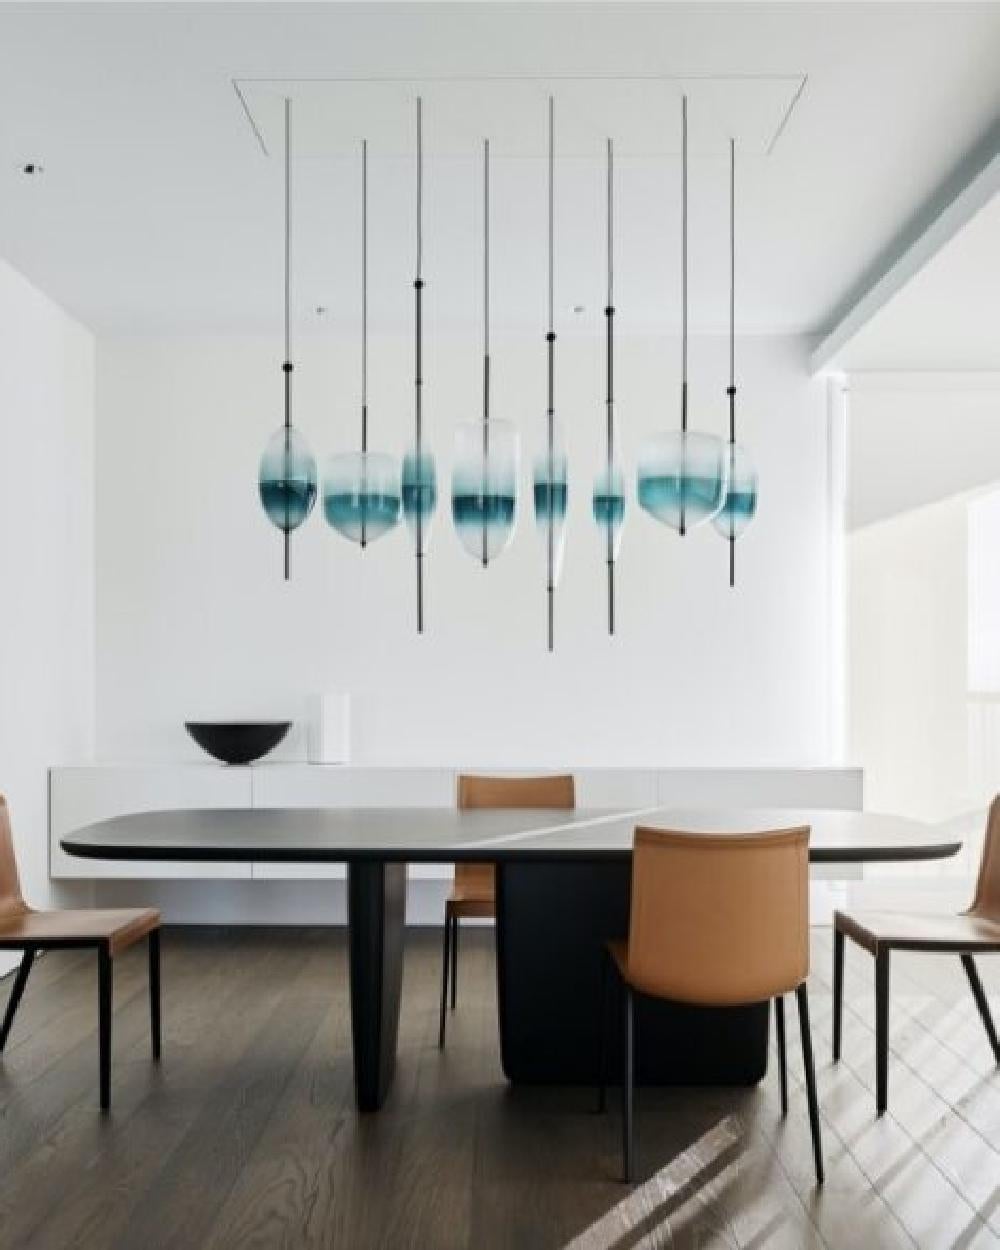 Metal FLOW[T] S3 Pendant lamp in Turquoise by Nao Tamura for Wonderglass For Sale